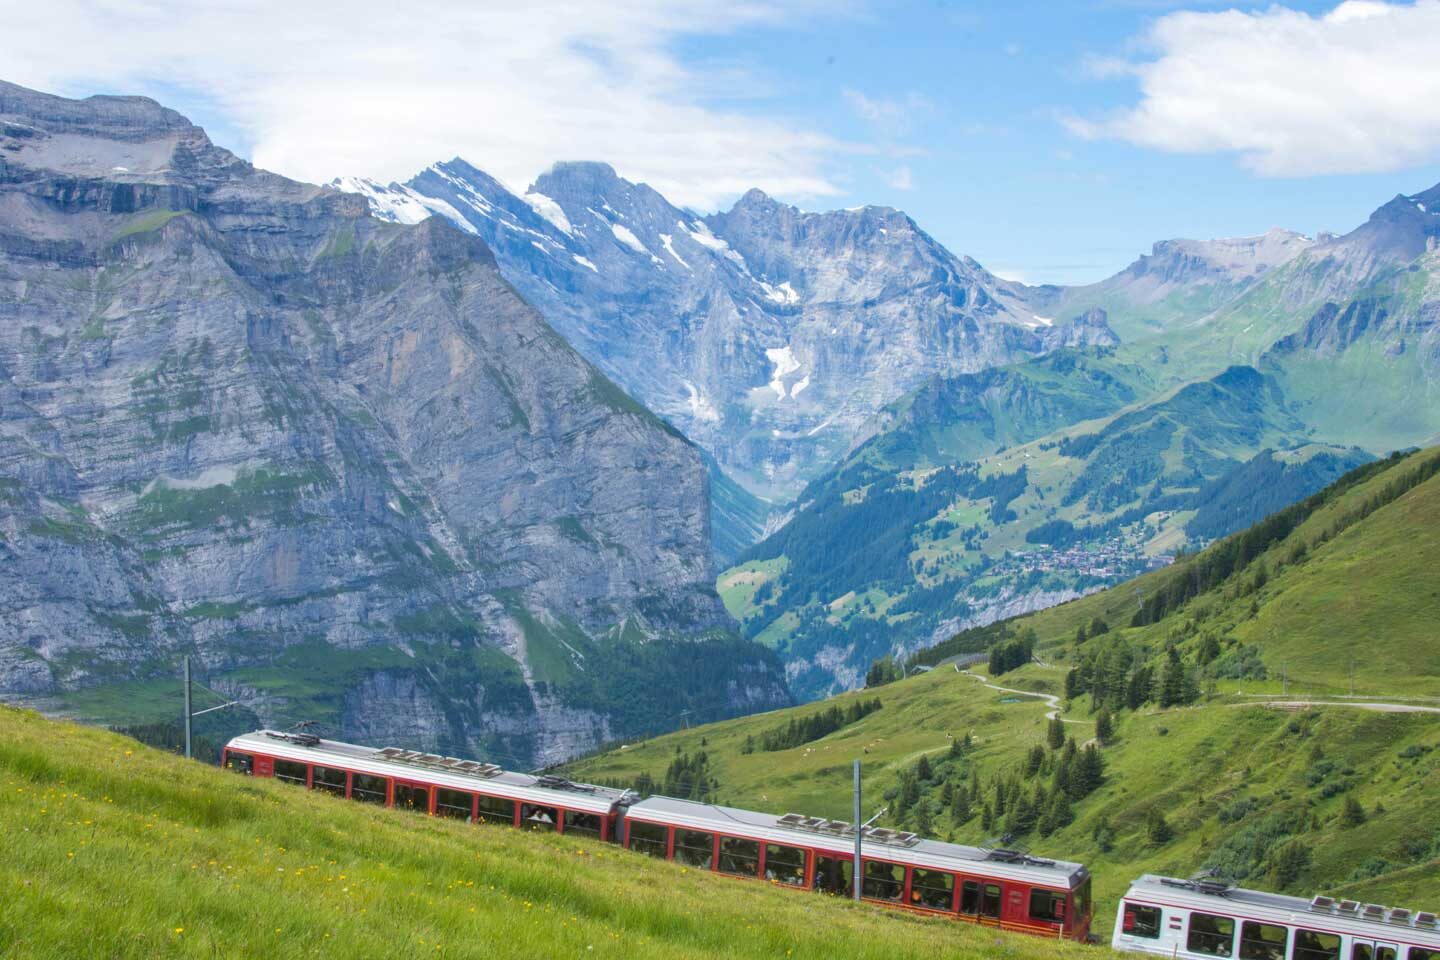 riding the train to the top of jungfraujoch